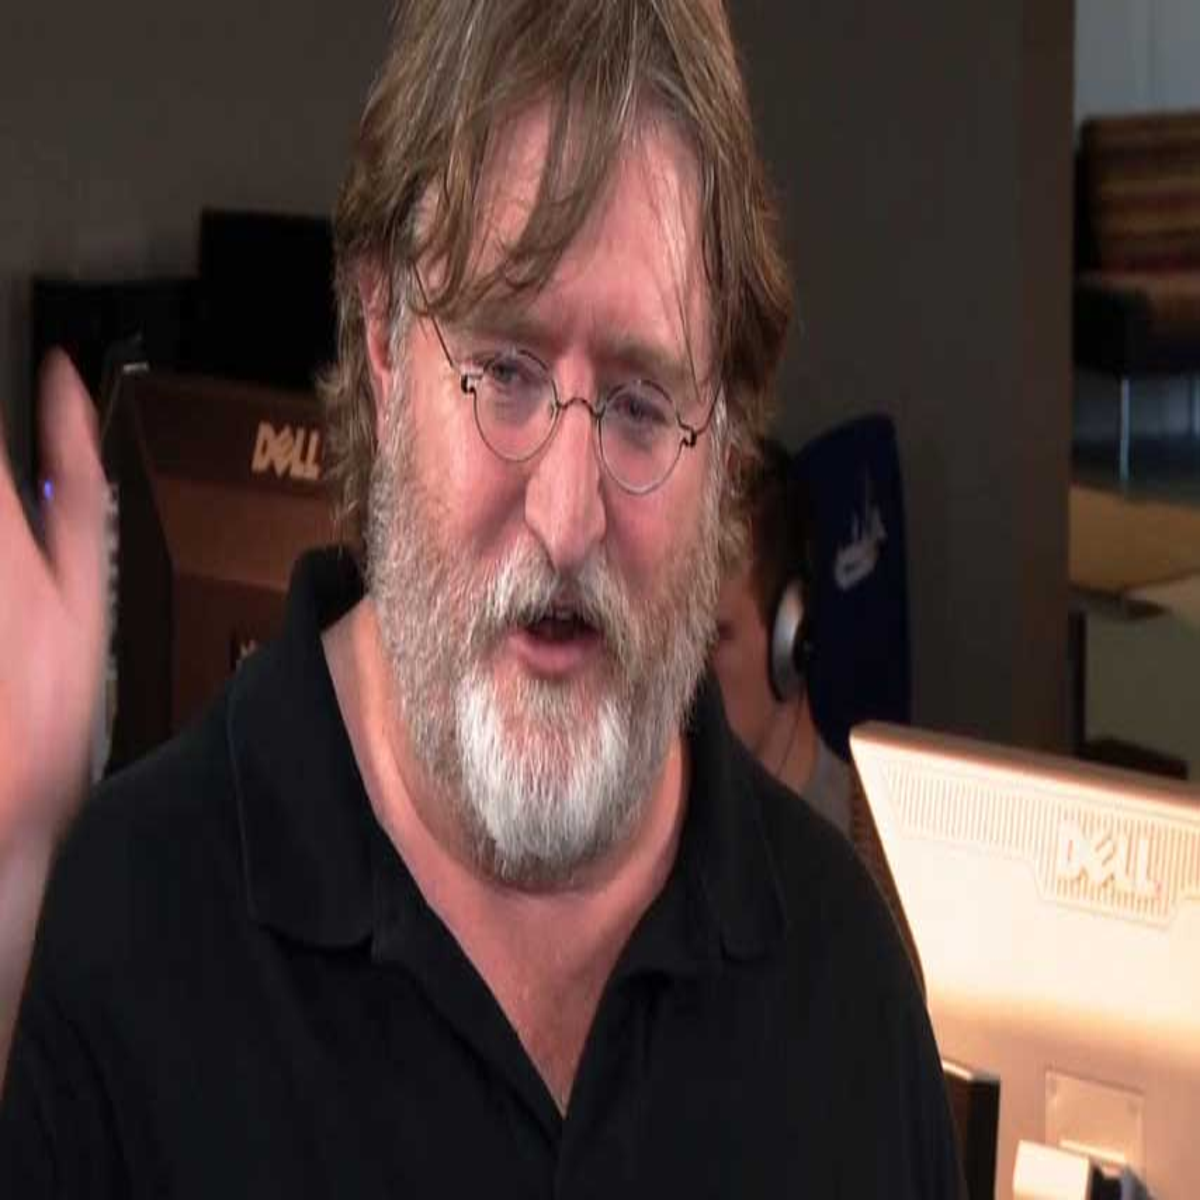 Gabe Newell Gives out his password while presenting a safety